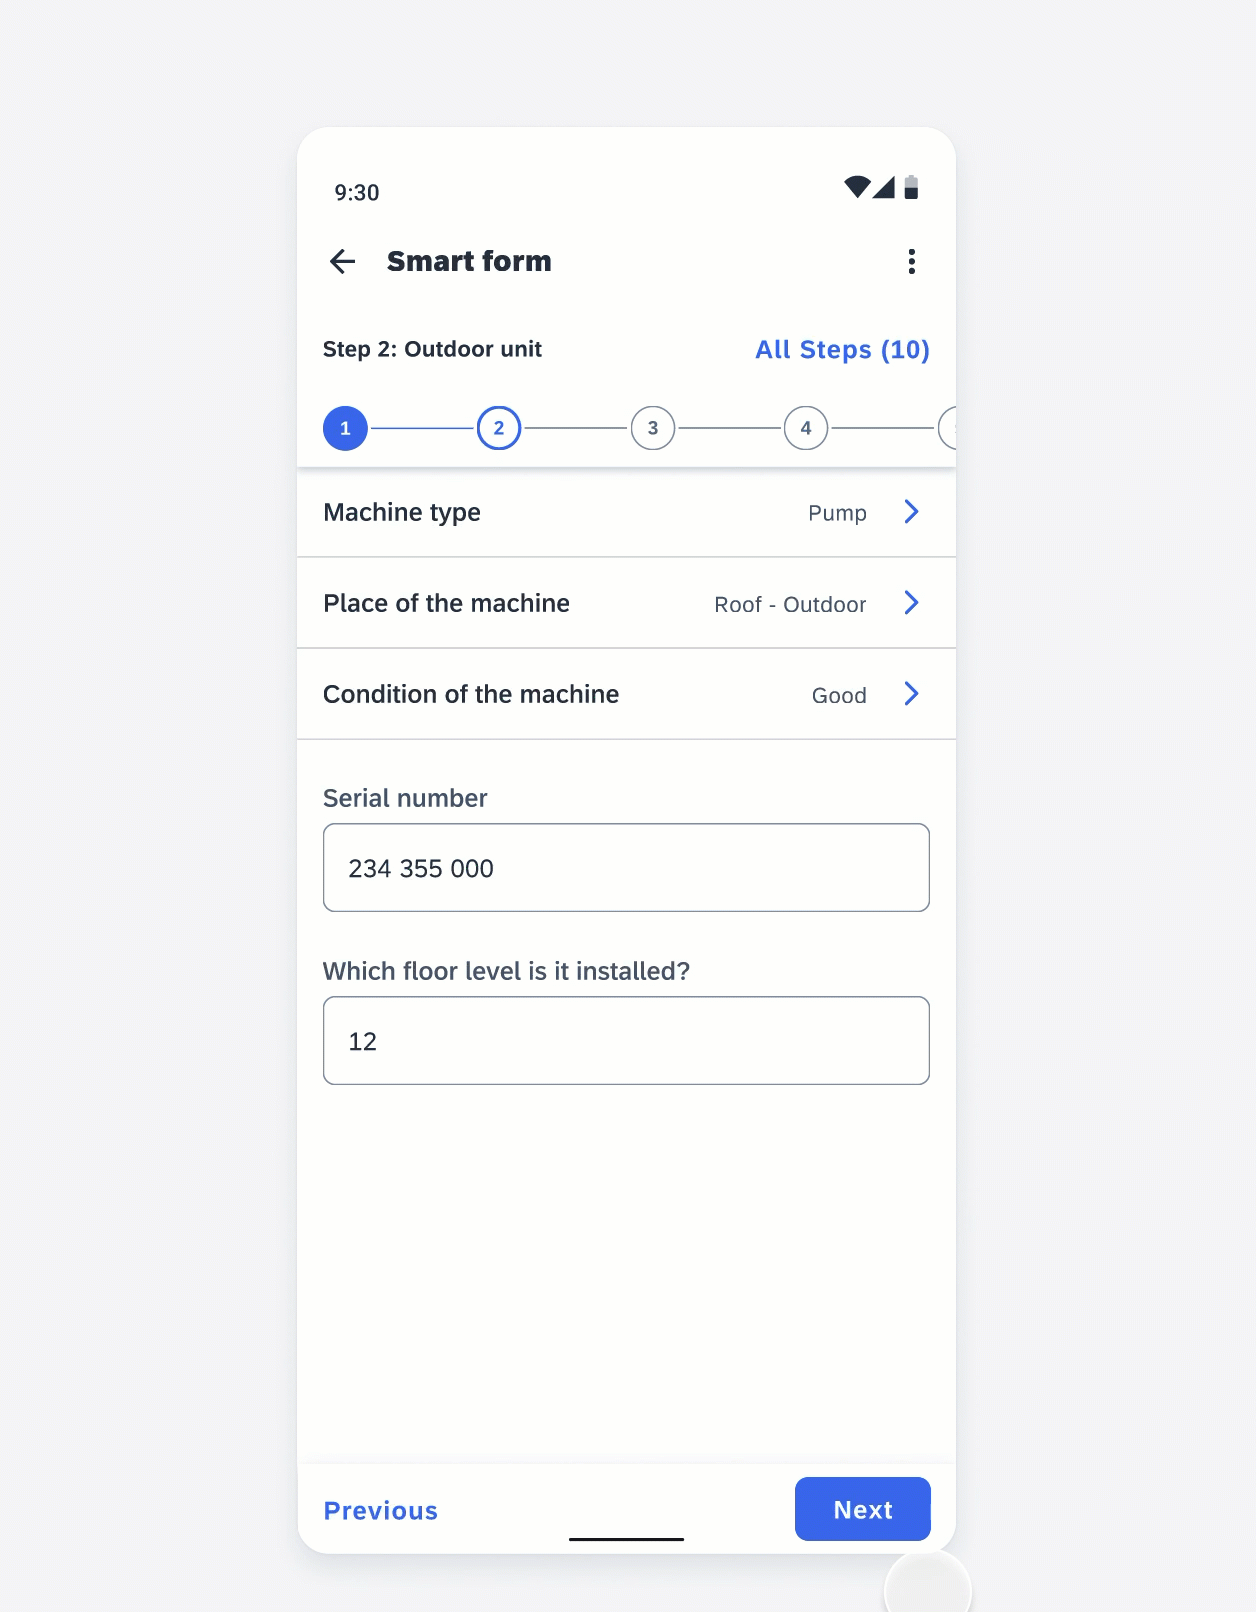 Users can tap on the “All Steps” button to view all steps vertically on a new screen 